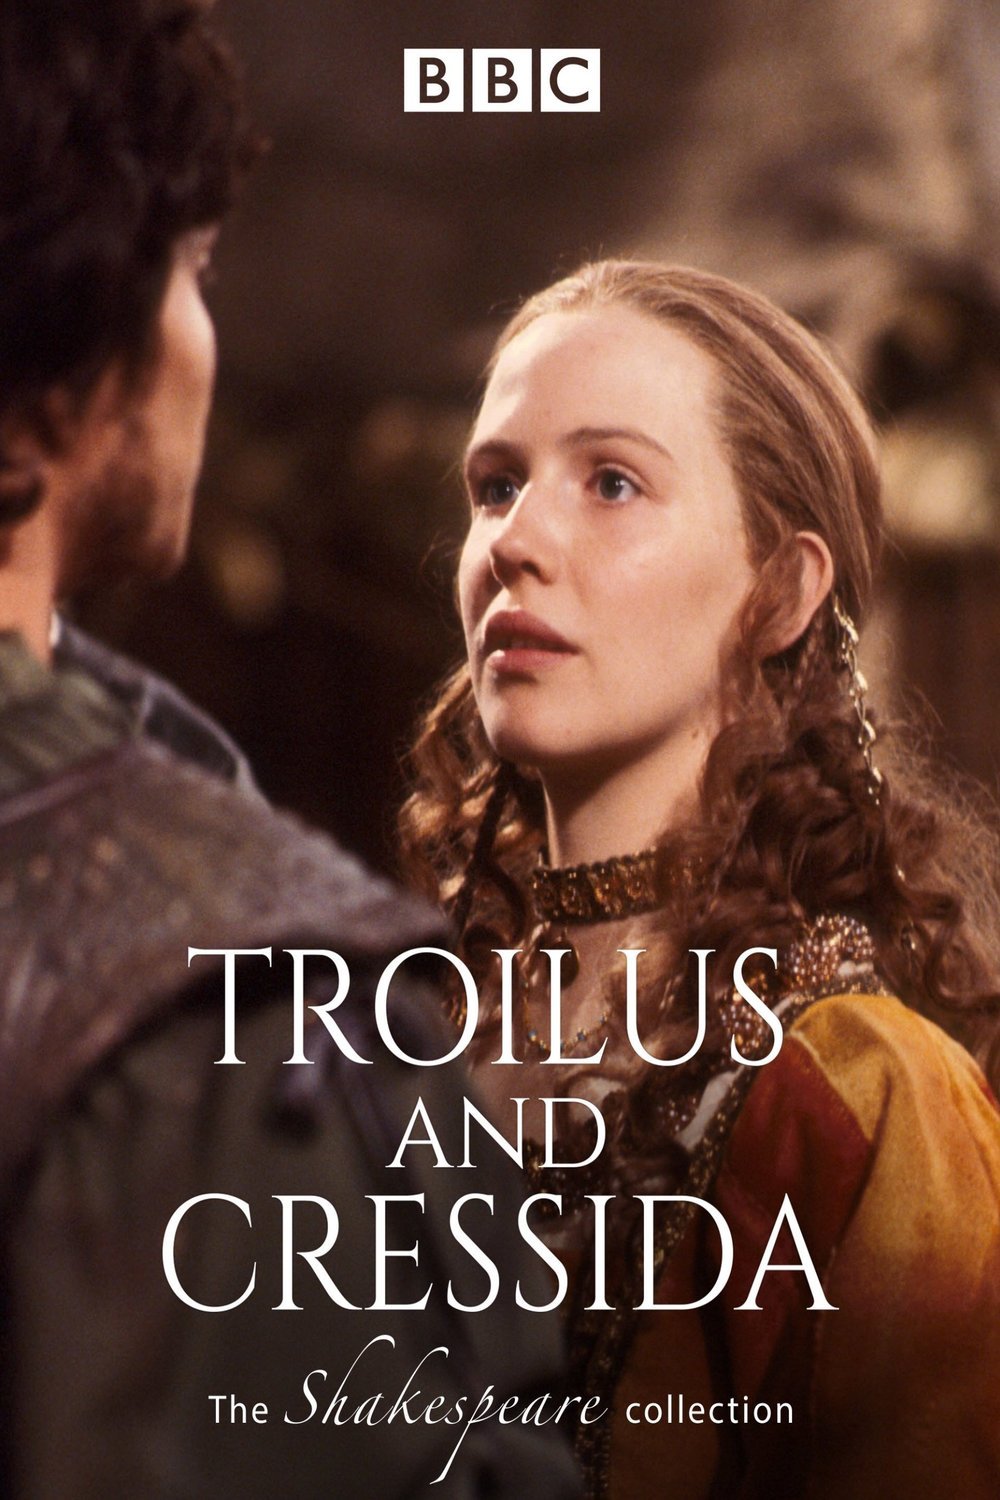 Poster of the movie Troilus and Cressida